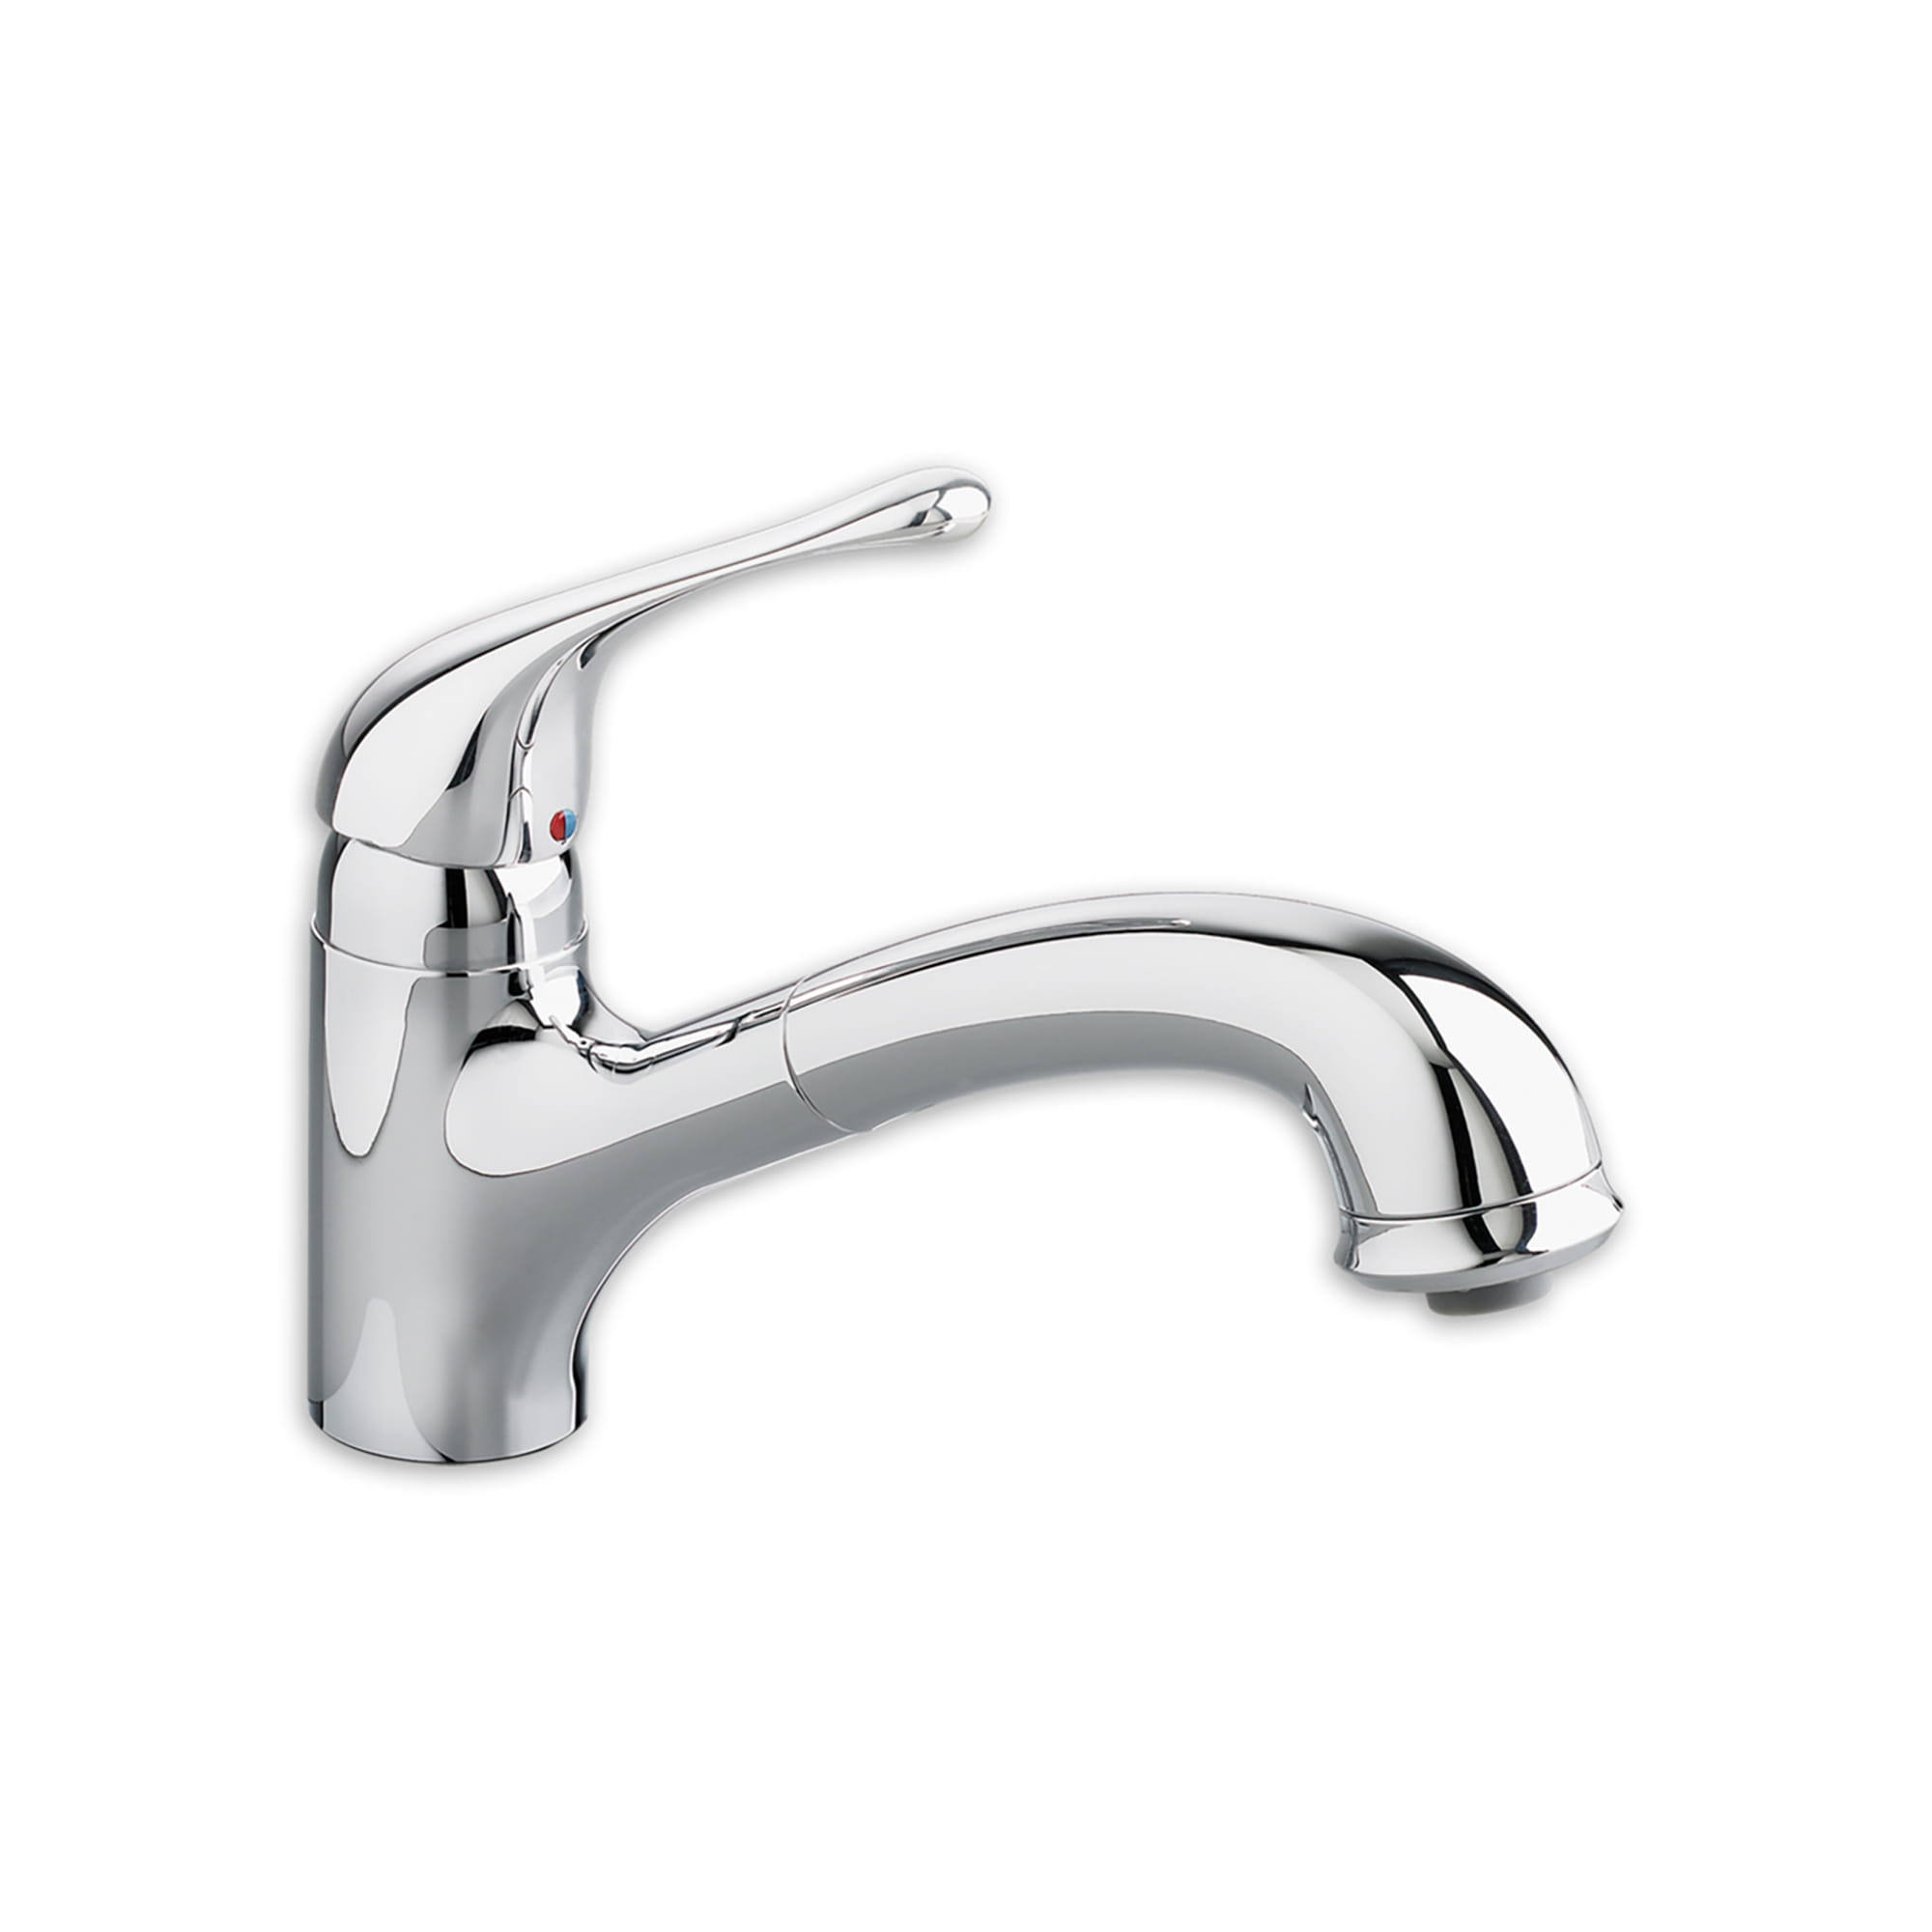 Colony Soft Single Handle Pull Out Dual Spray Kitchen Faucet 15 gpm 57 L min CHROME